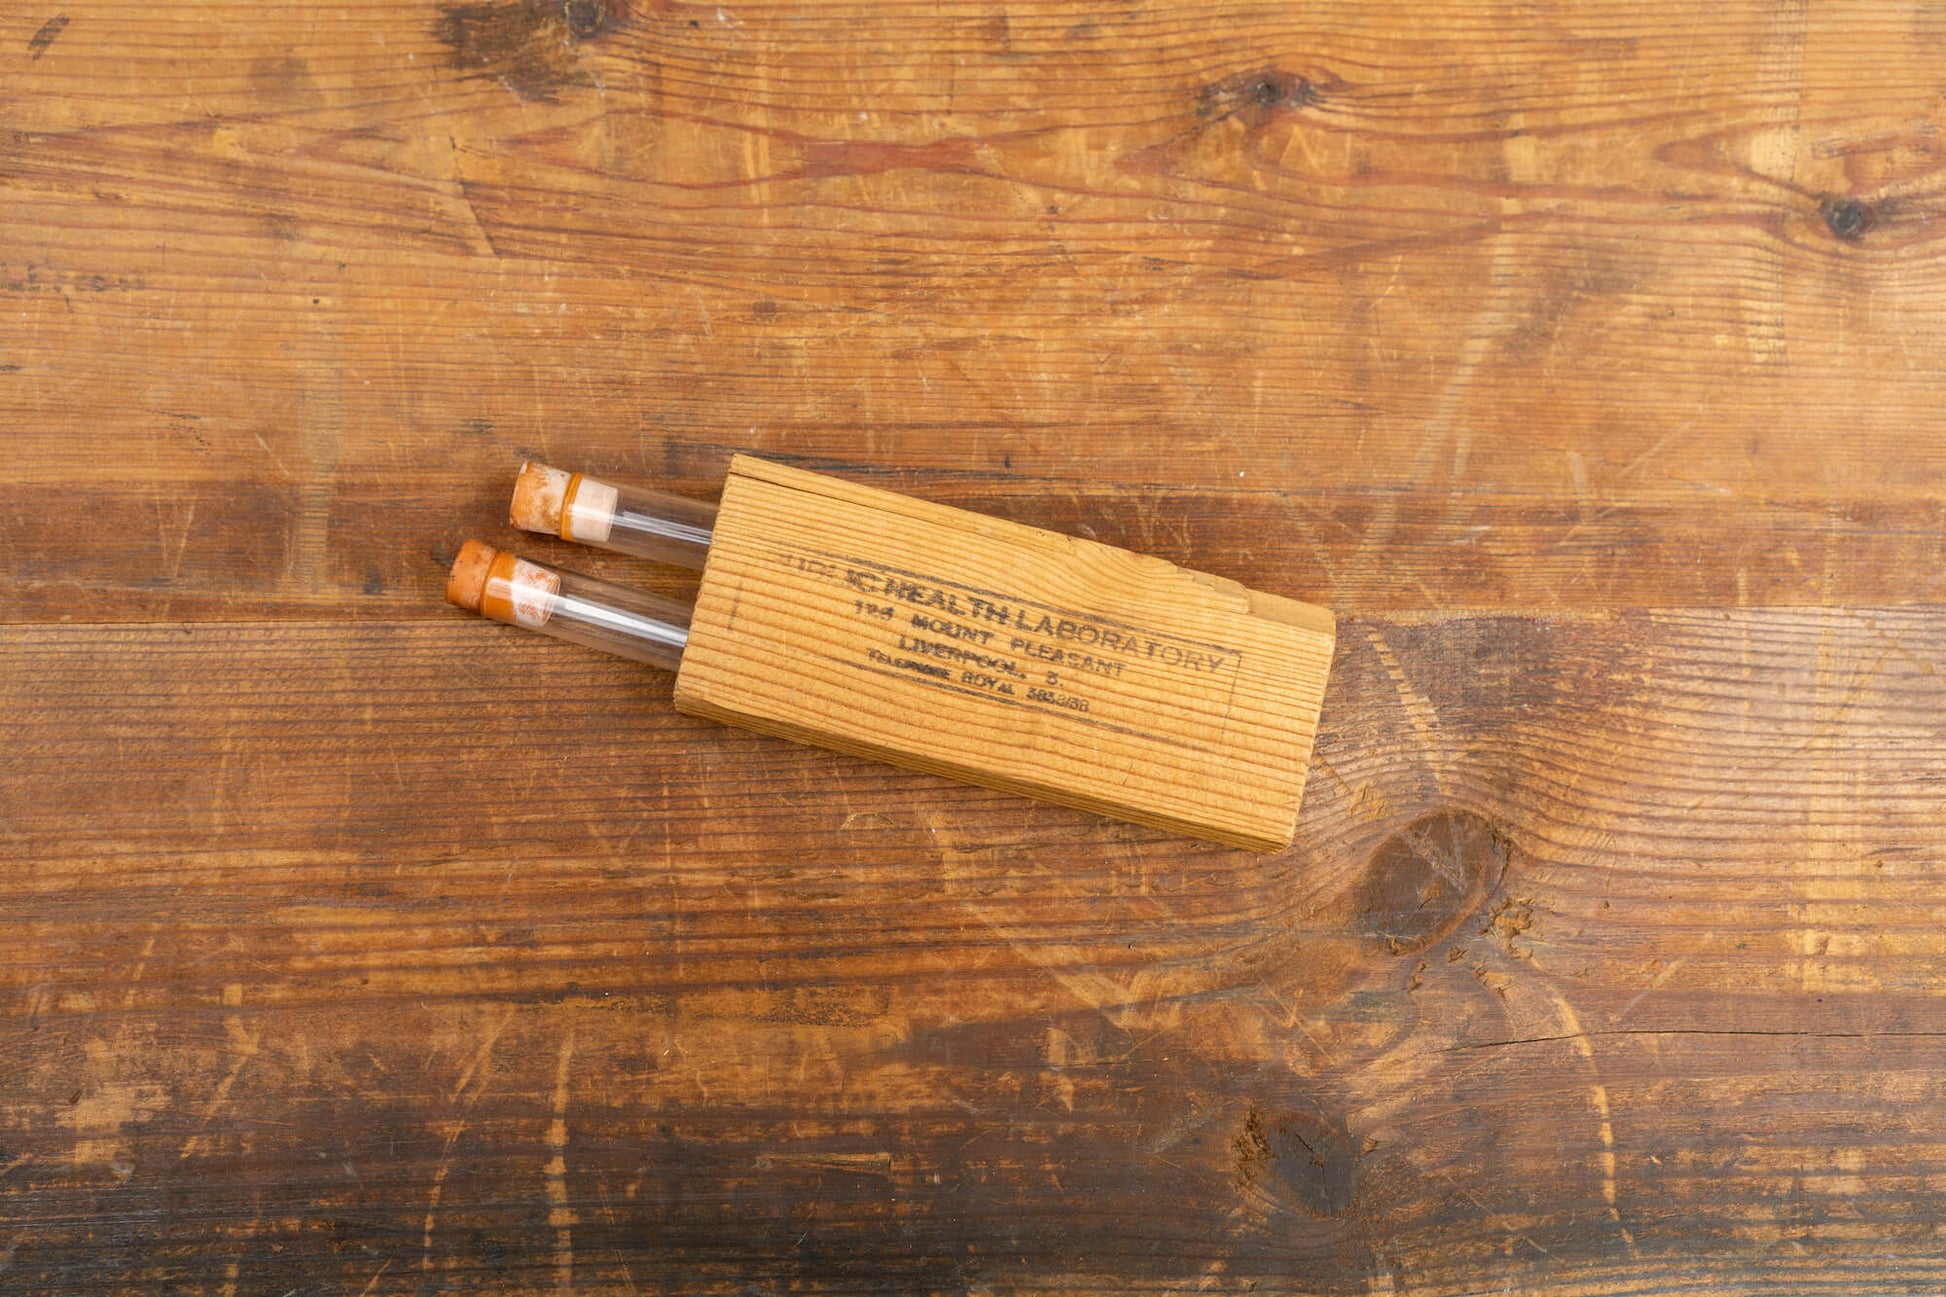 A flatlay photo taken from above of two vintage test tubes in a wooden holder.